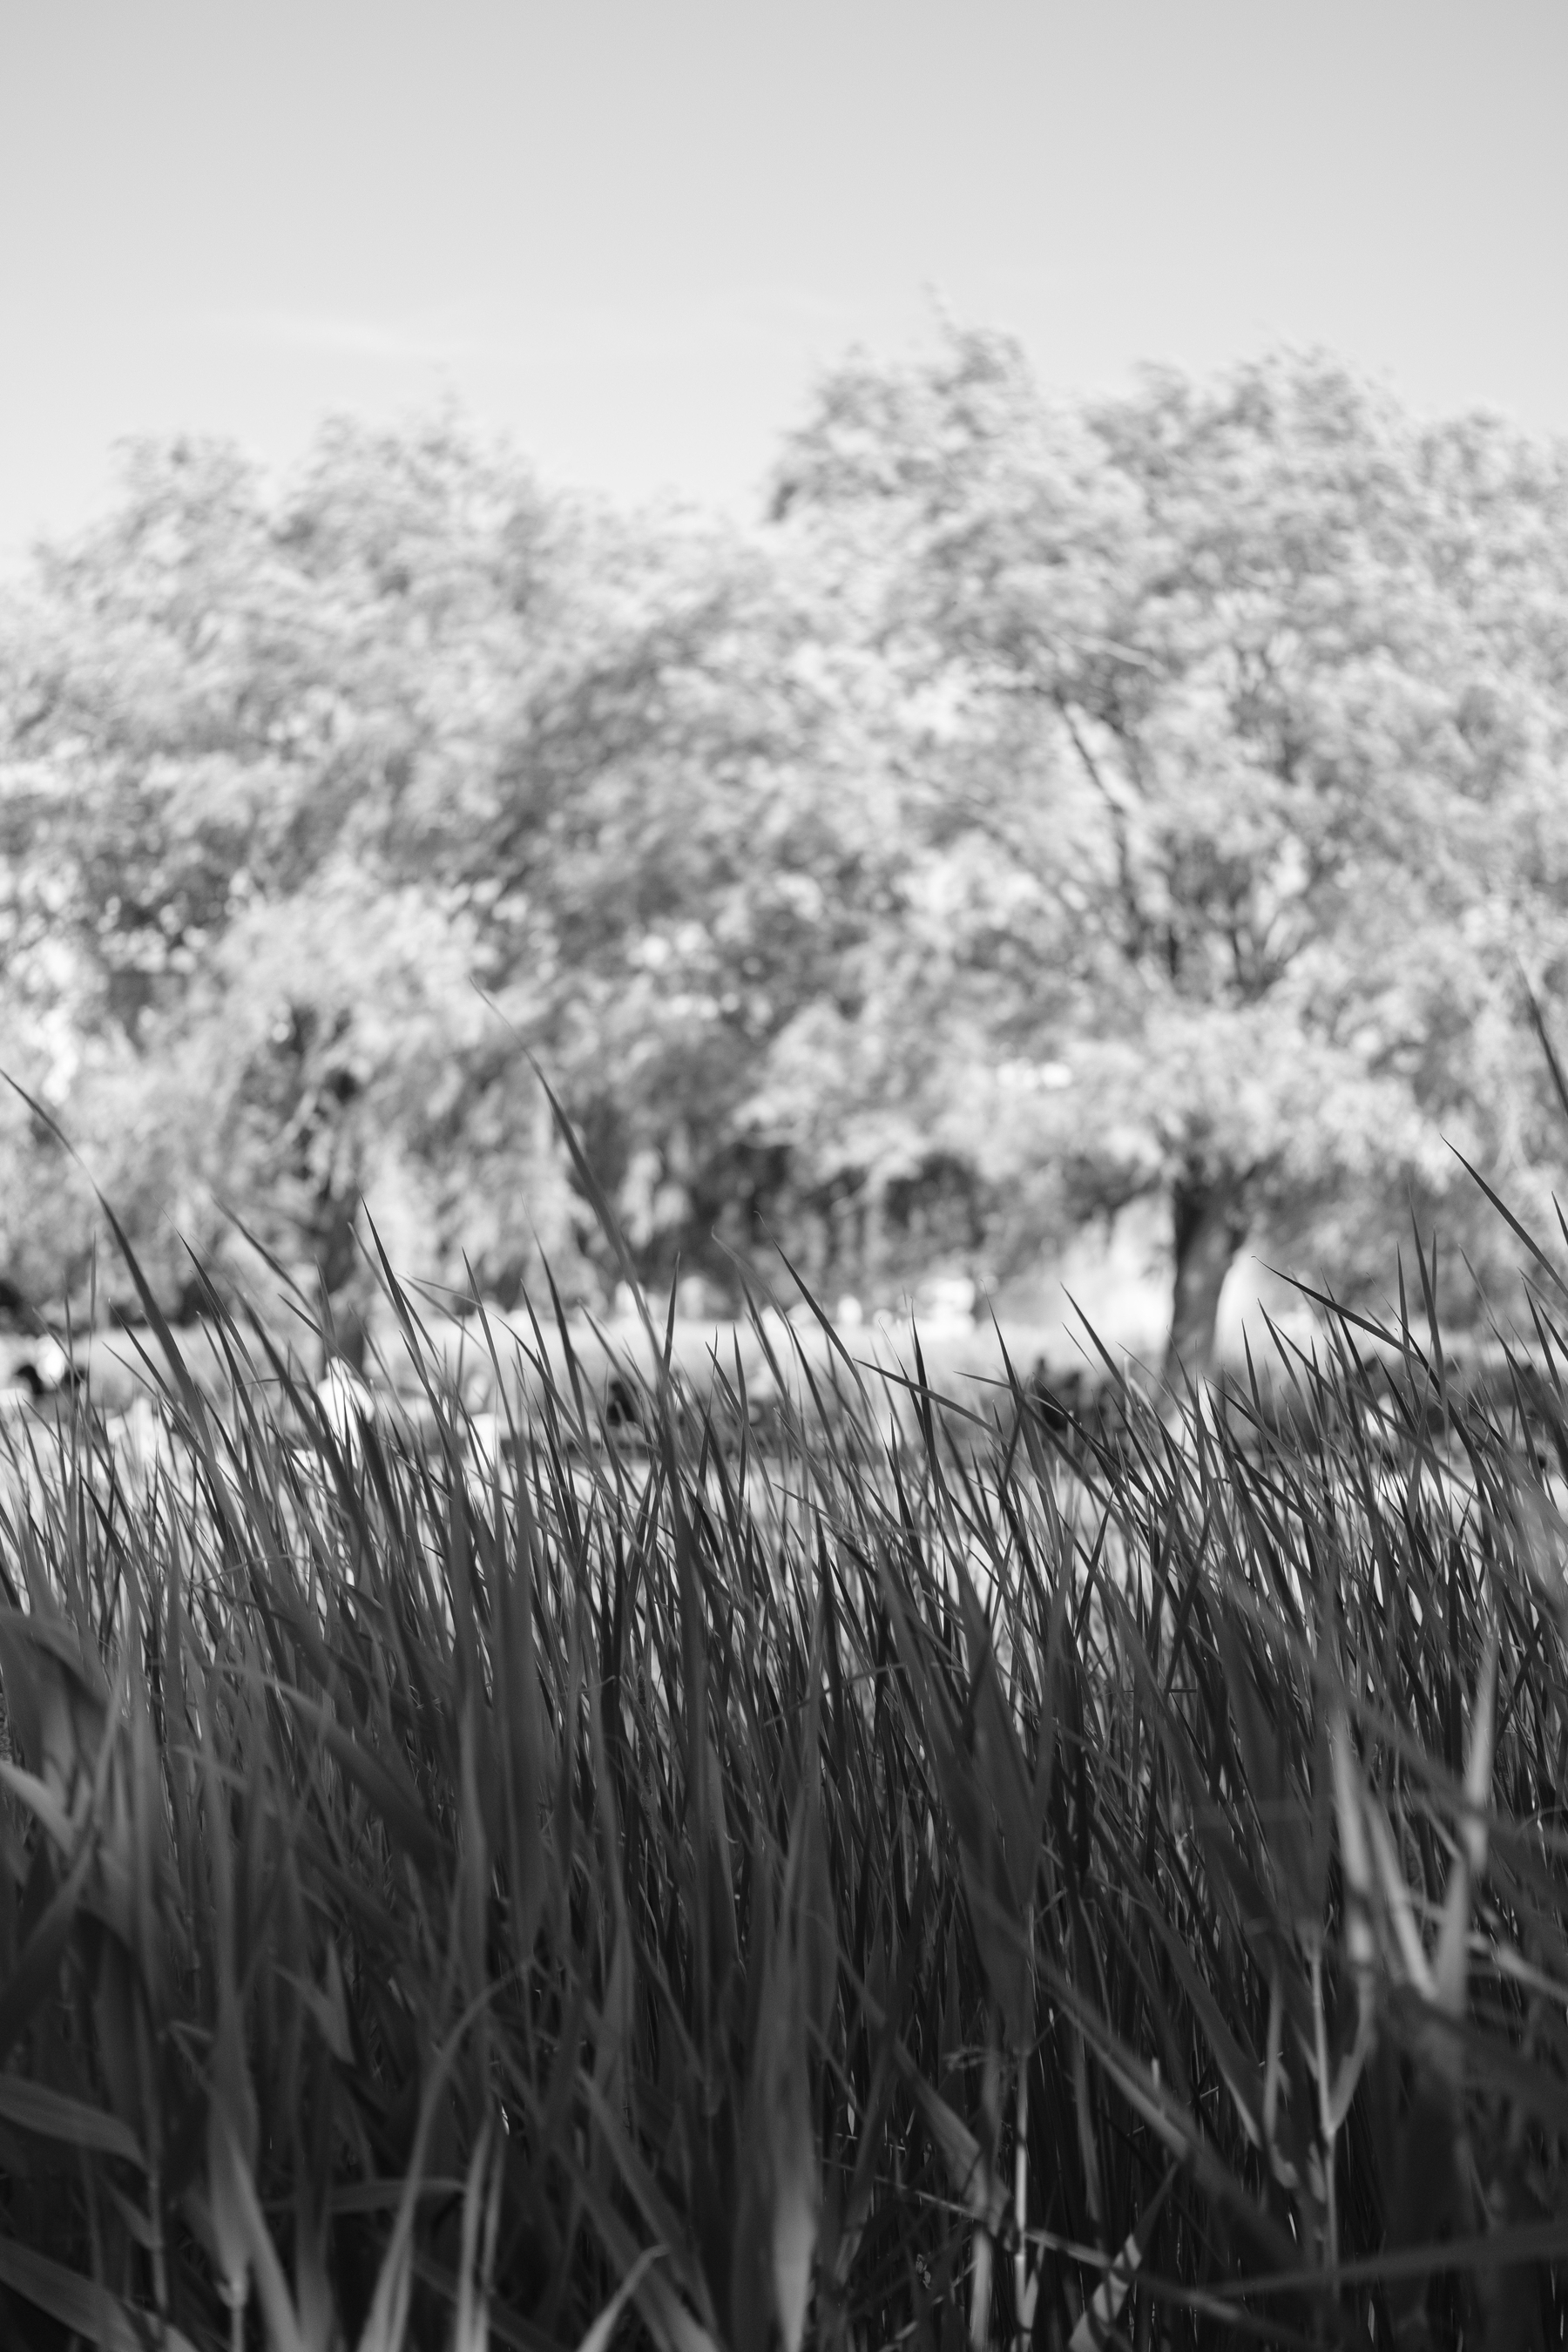 We see out-of-focus trees through a row of tall grass.